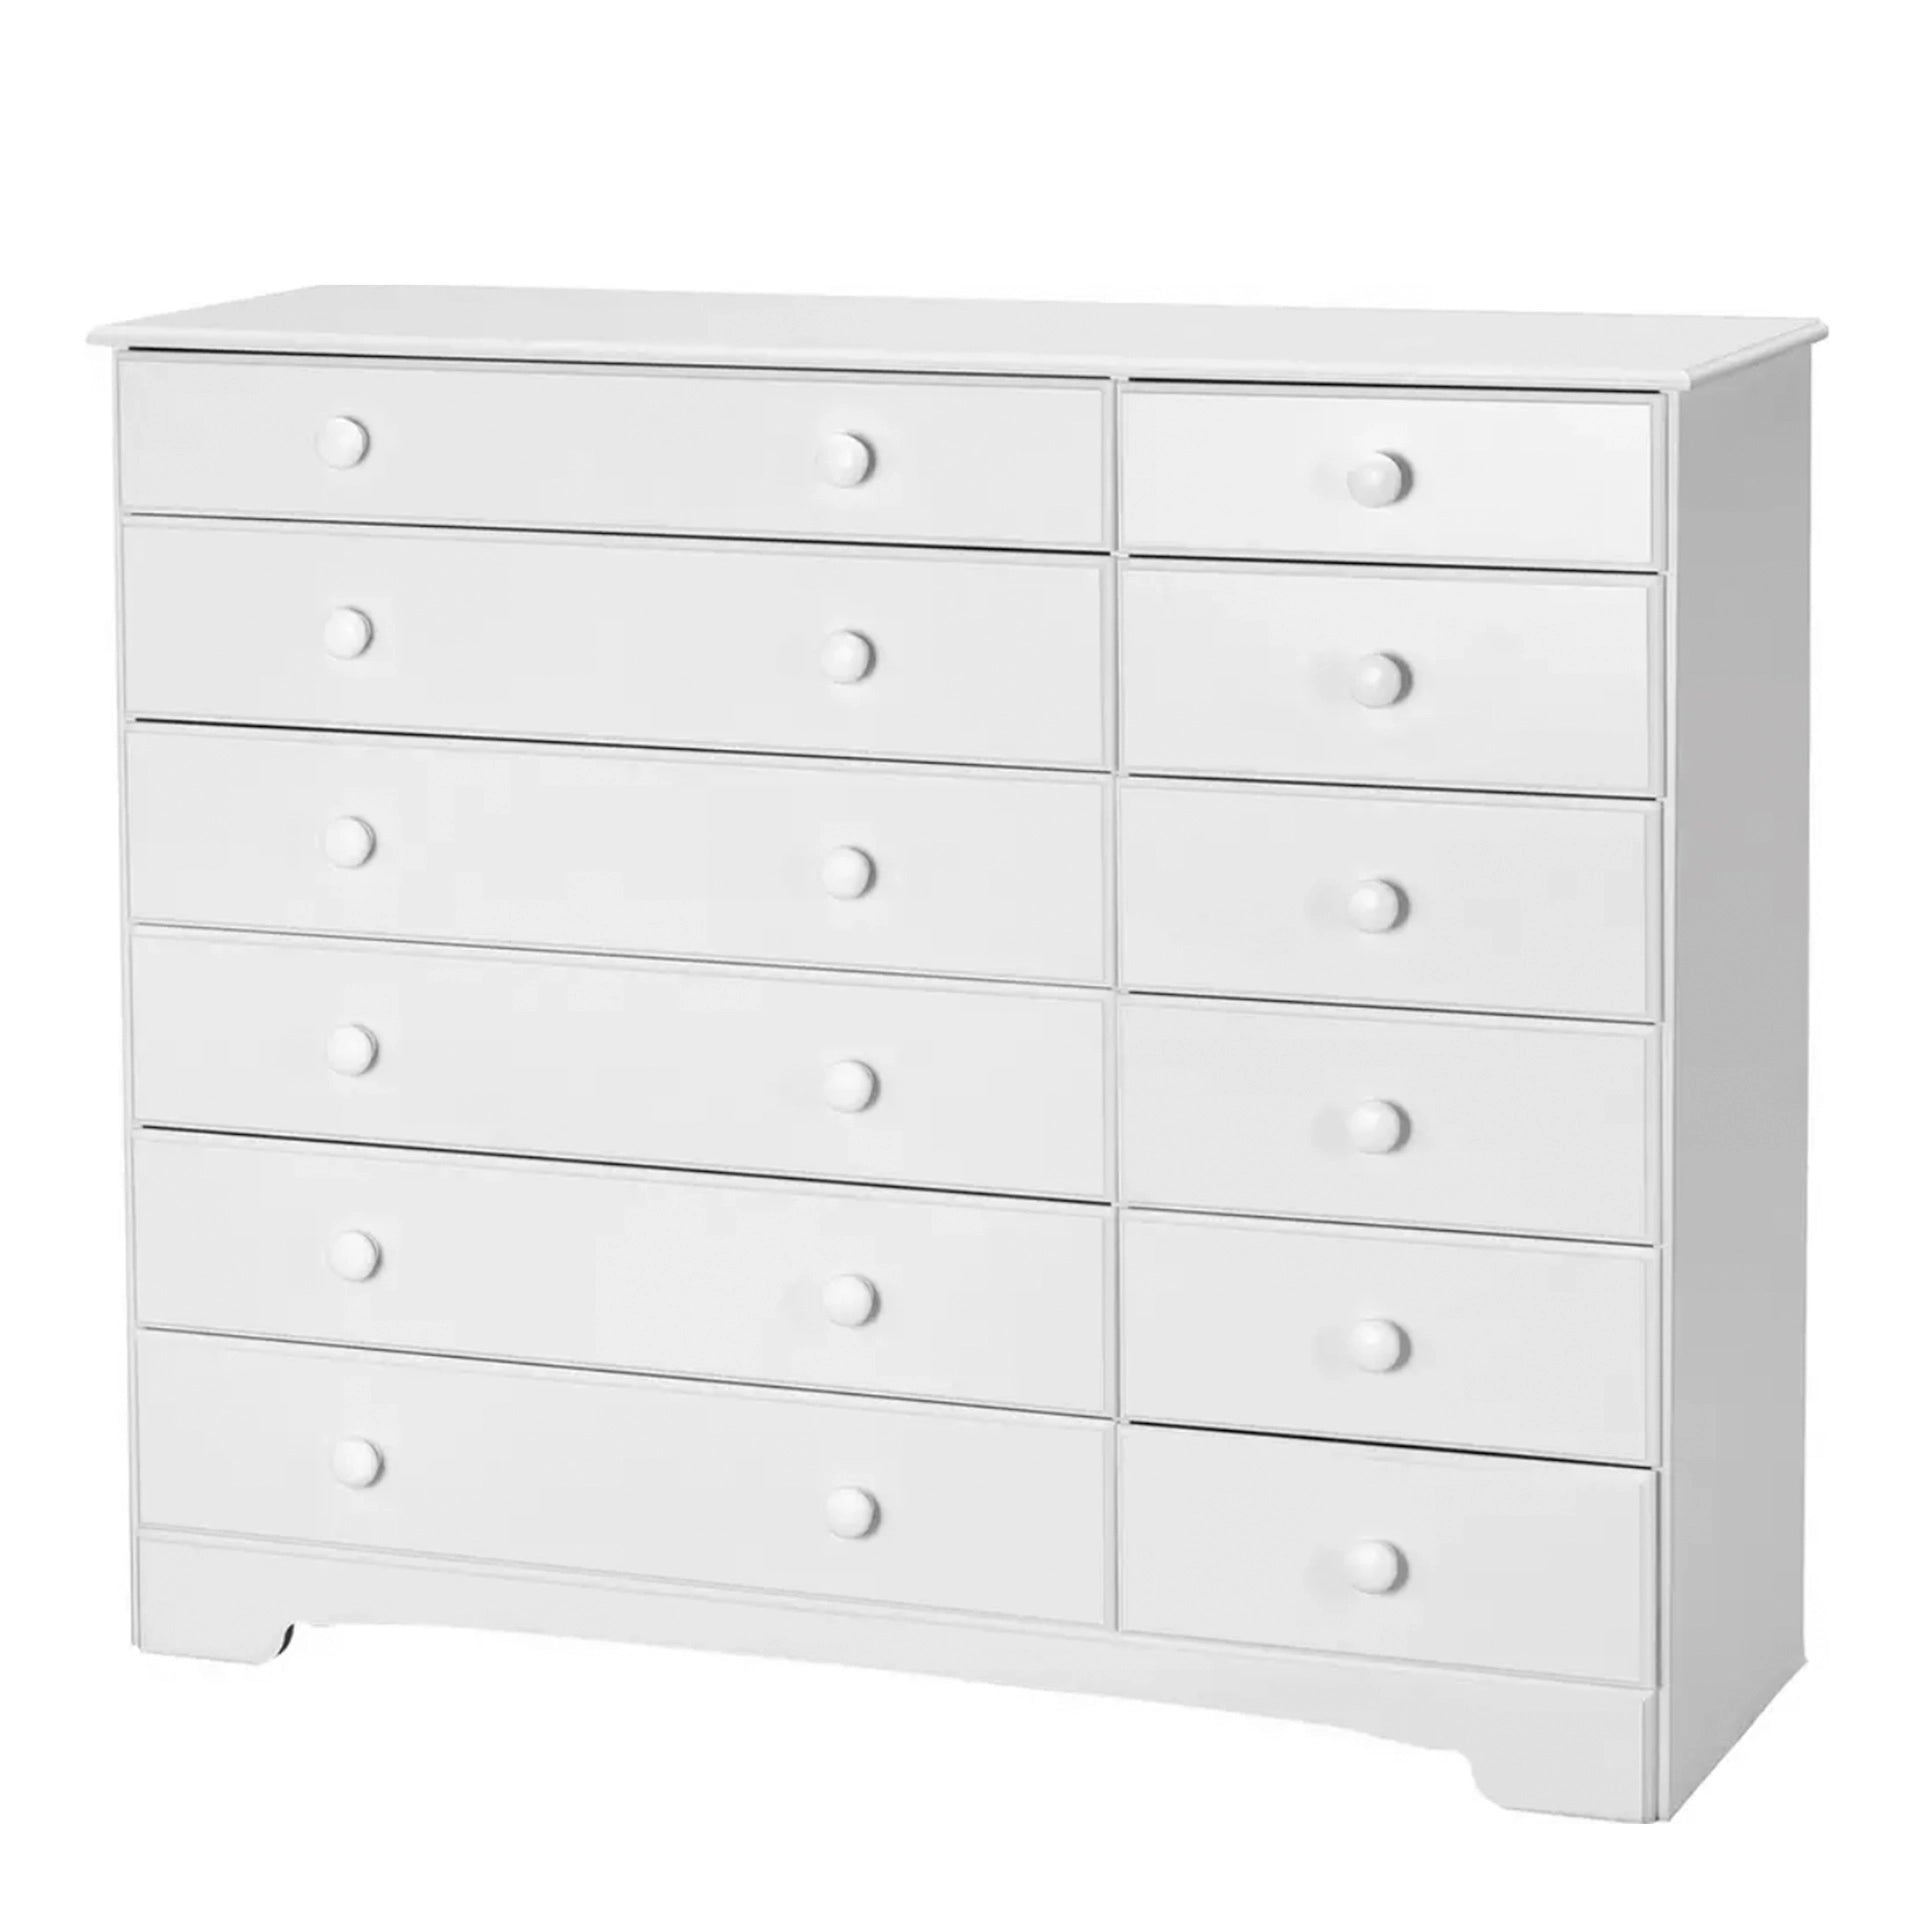 Furniture To Go Nordic Chest of Drawers 6+6 Drawers, White 050